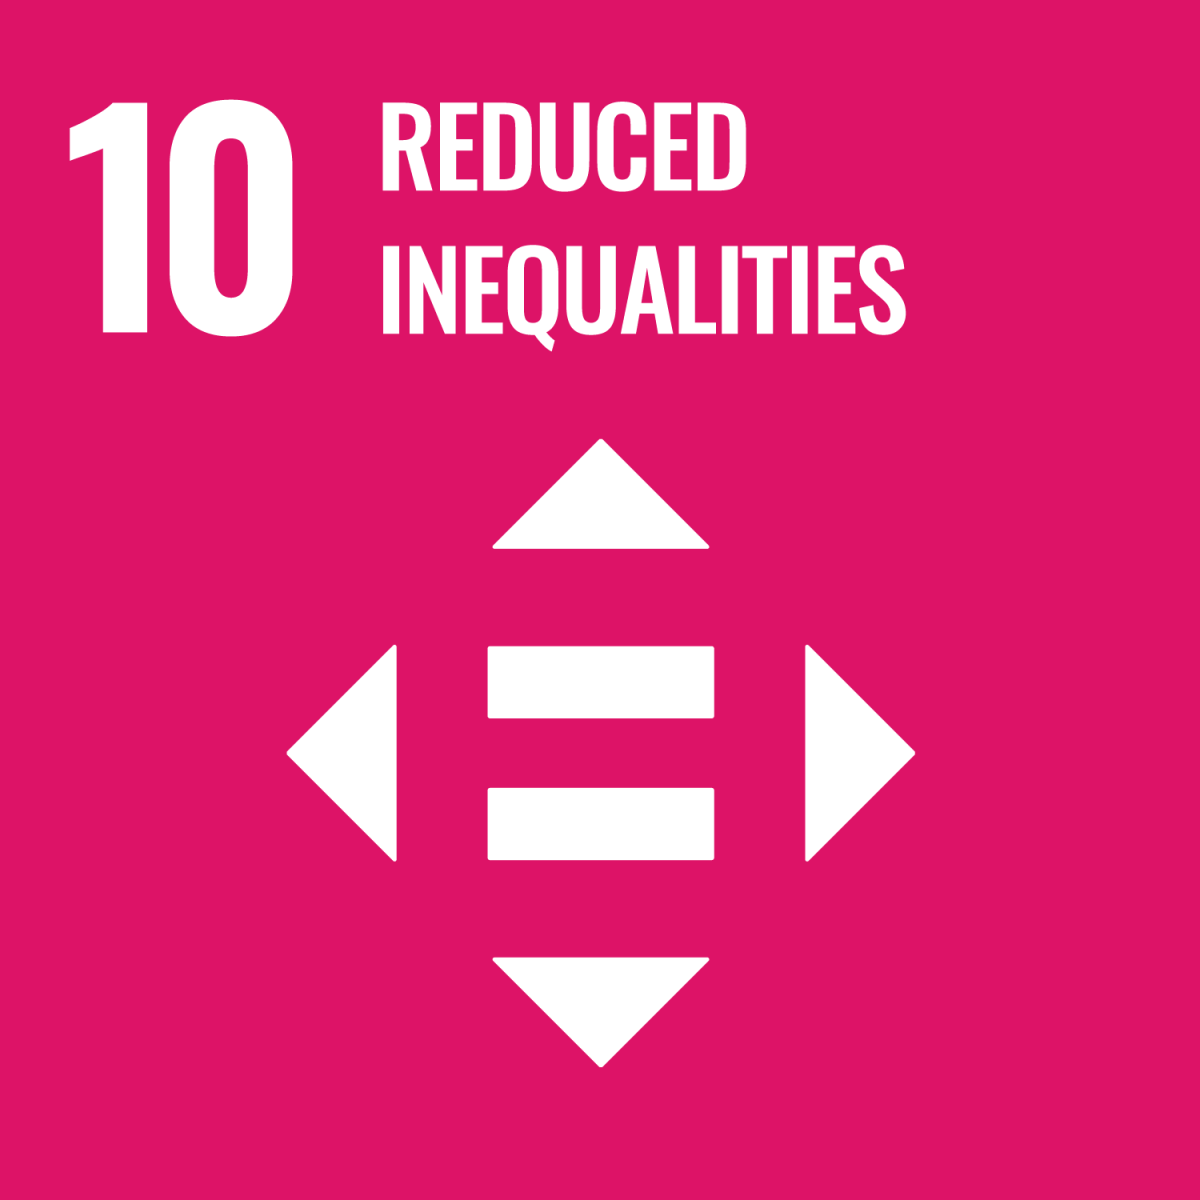 Shows UN SDG Reduced Inequalities